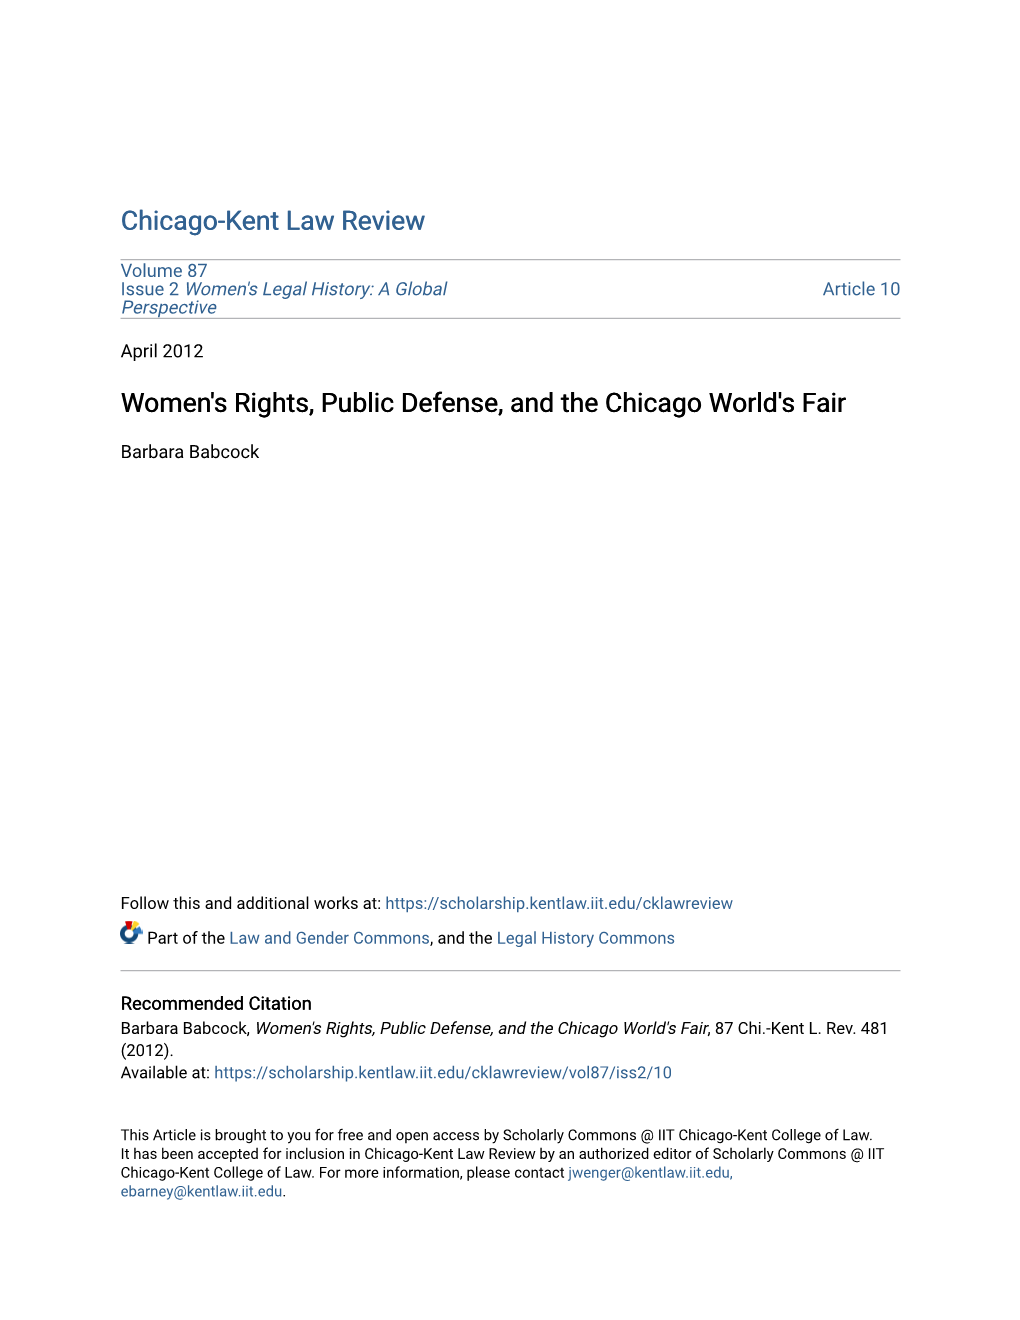 Women's Rights, Public Defense, and the Chicago World's Fair